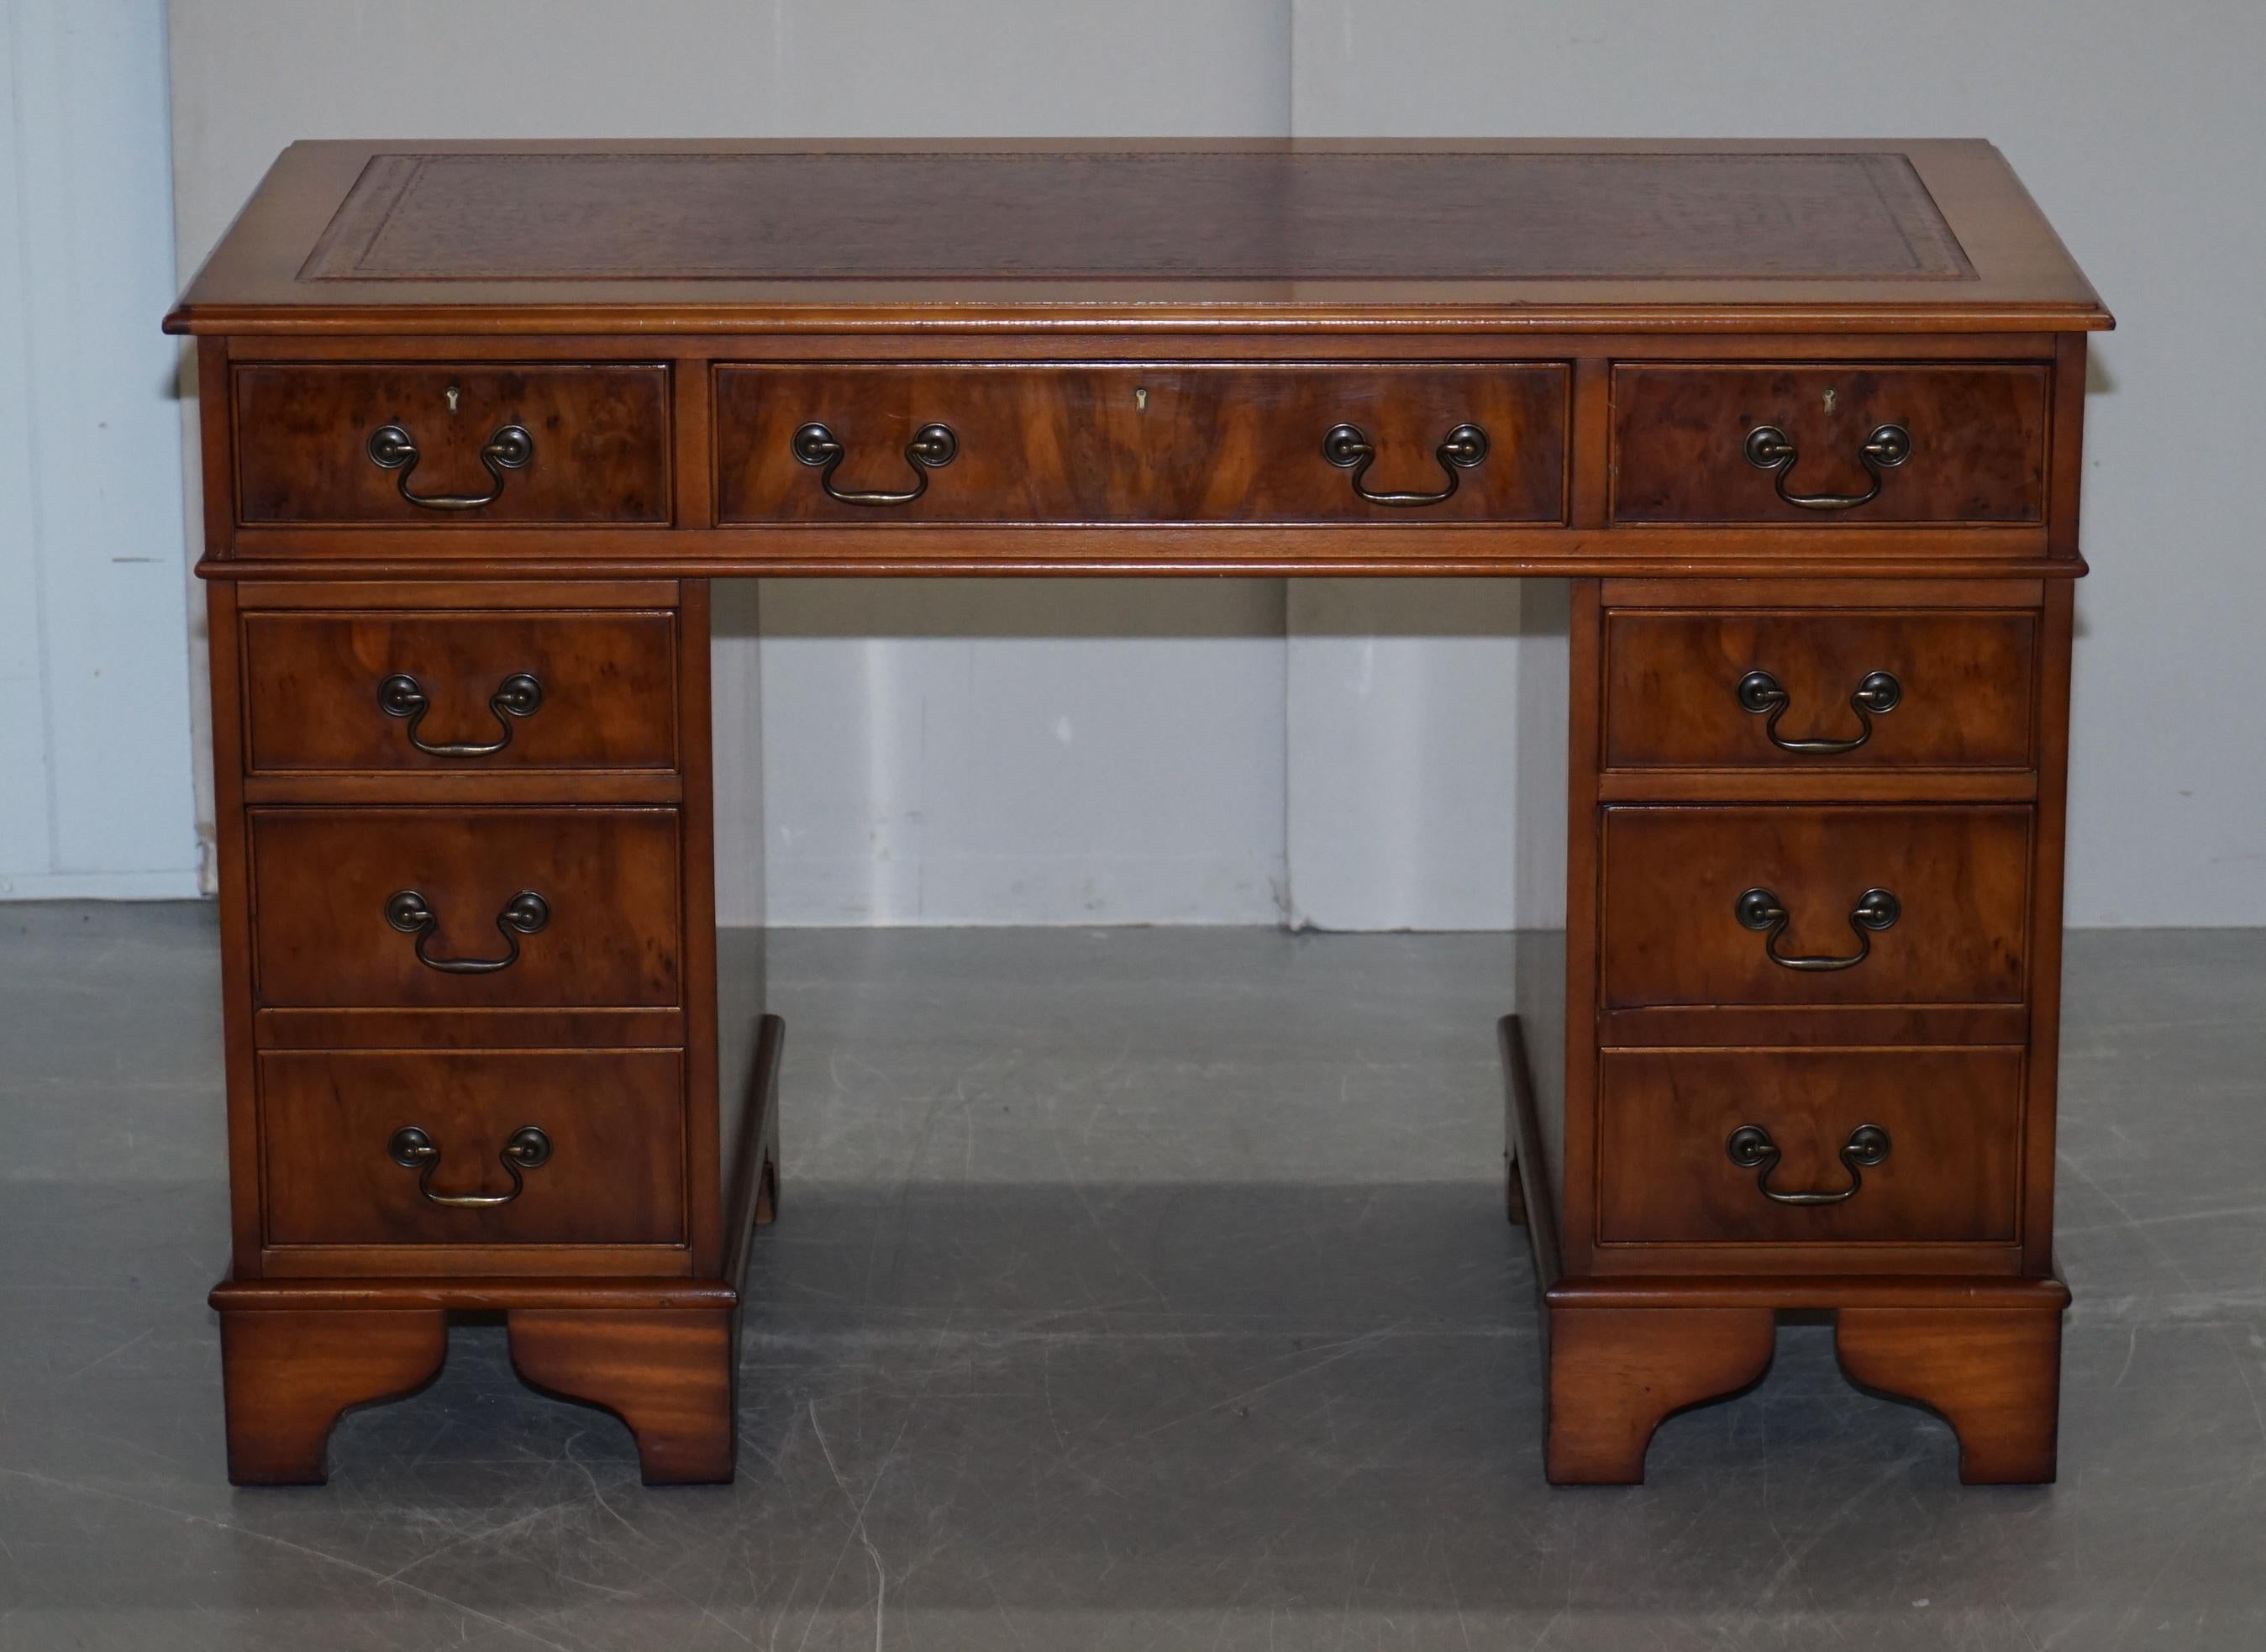 We are delighted to offer for sale this stunning vintage Burr Walnut twin pedestal partner desk with oxblood leather writing surface

A good looking well made and decorative desk, it splits into three pieces for ease of transport. The timber